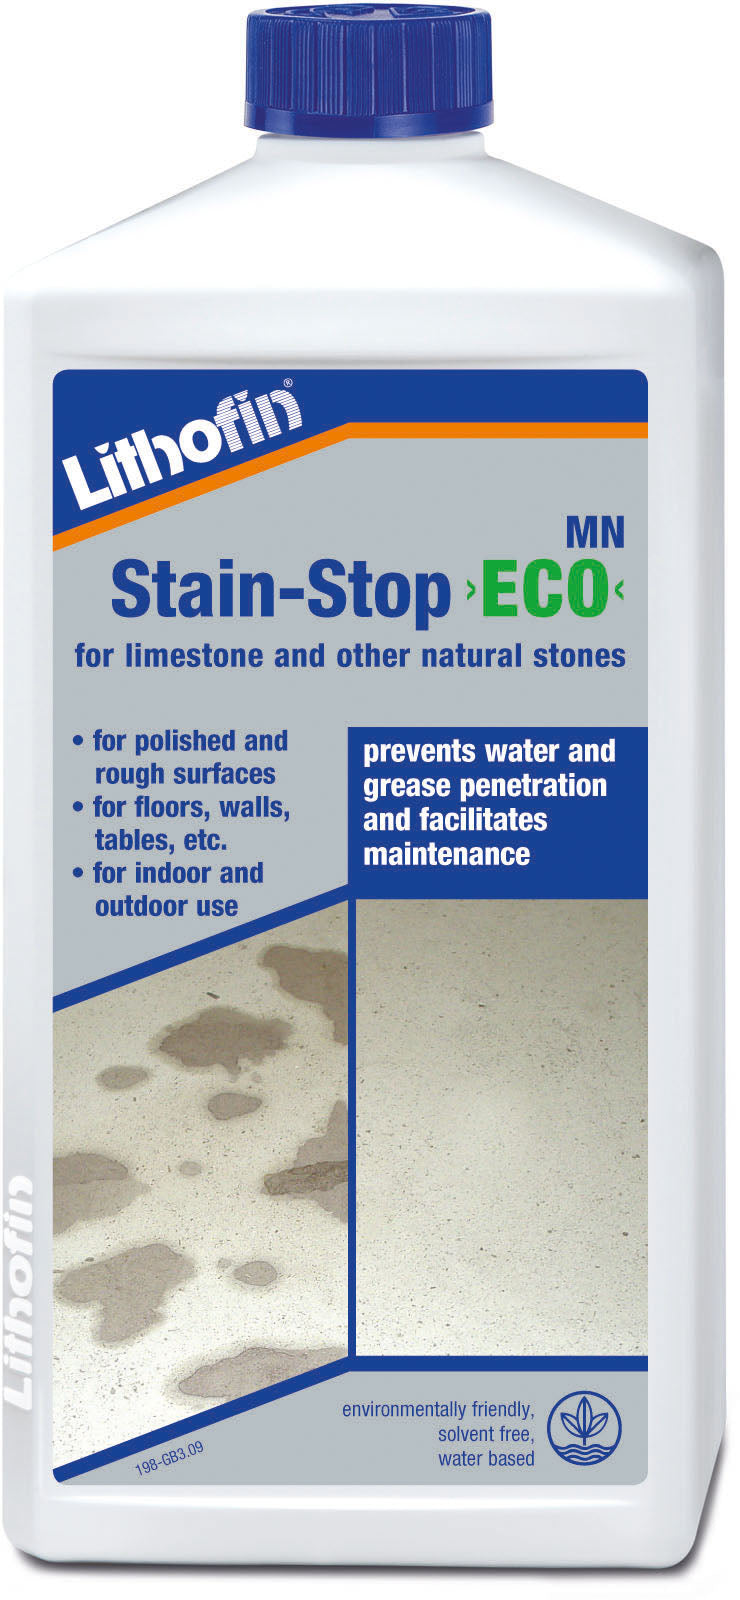 Lithofin stain stop eco for limestone and other natural stones 